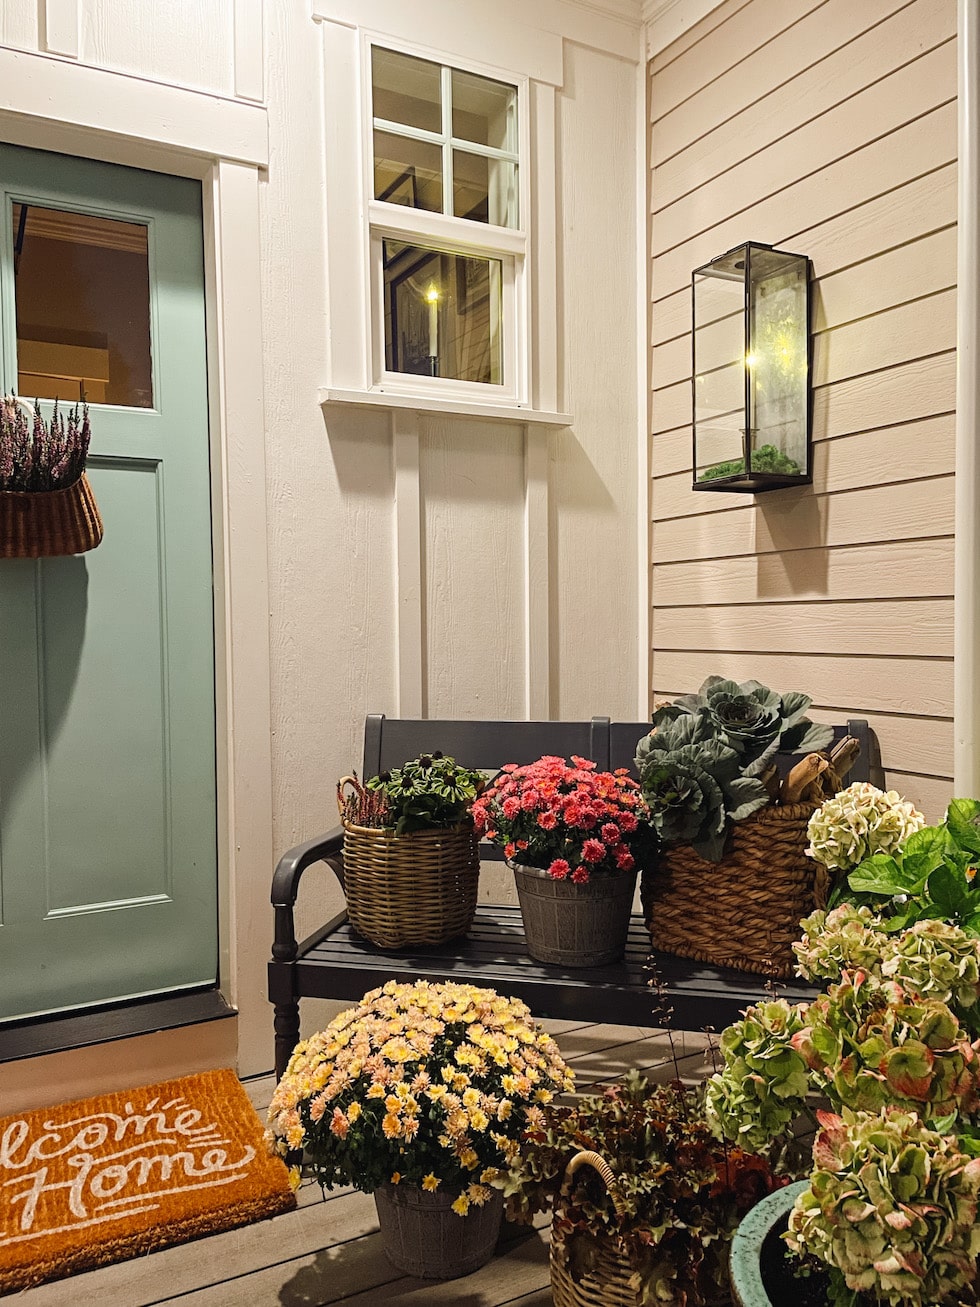 13 Simple Ways to Make Your Home Feel Like Fall